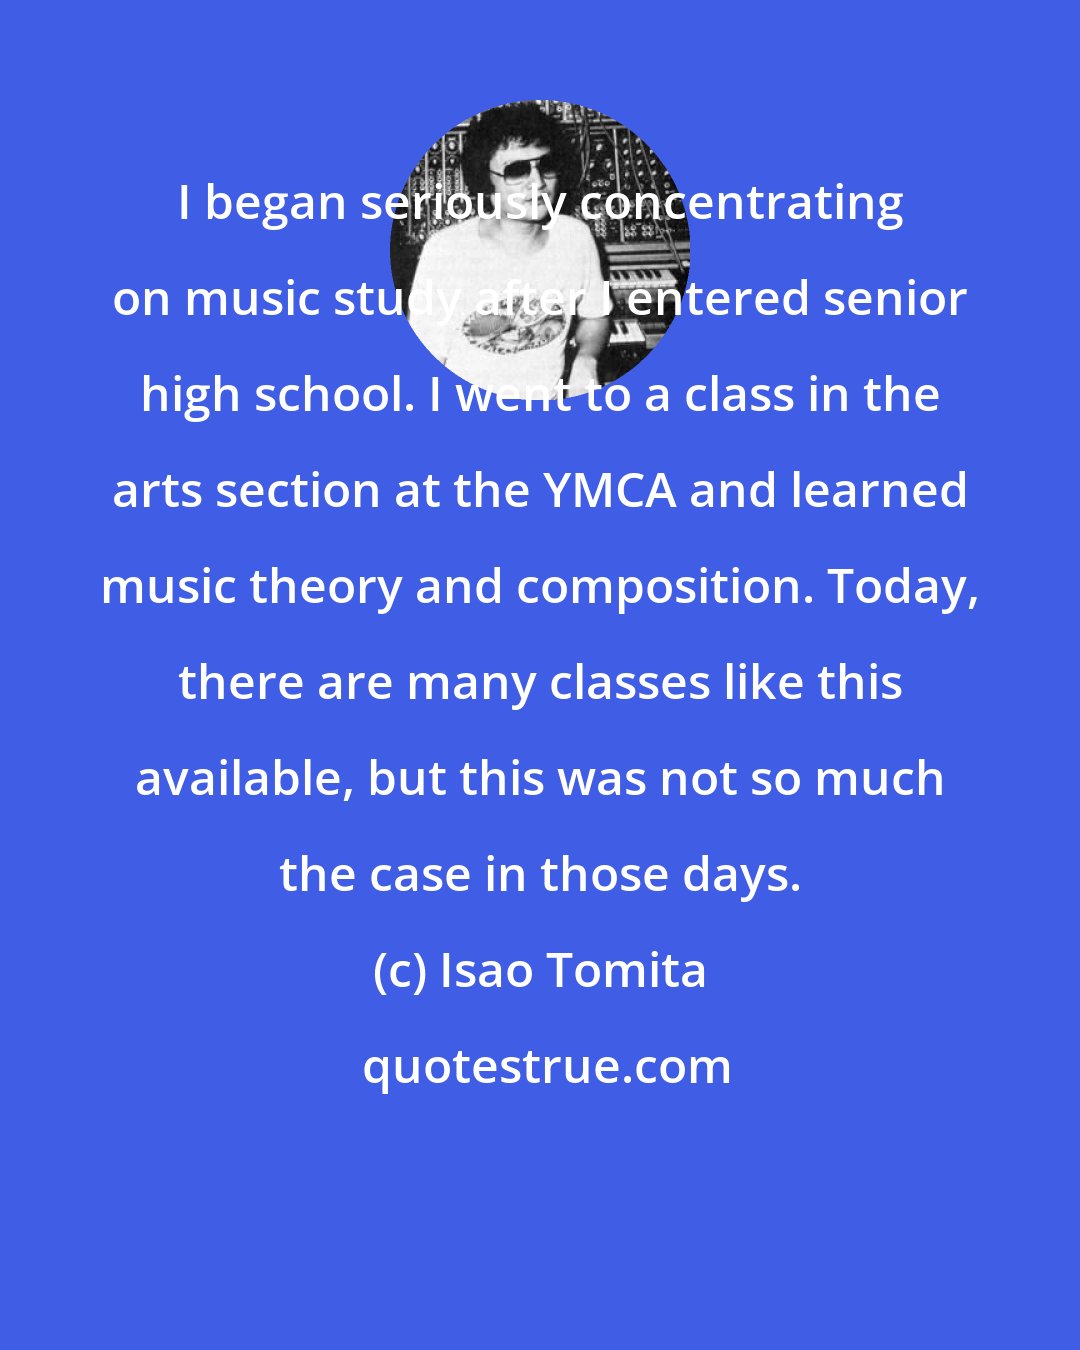 Isao Tomita: I began seriously concentrating on music study after I entered senior high school. I went to a class in the arts section at the YMCA and learned music theory and composition. Today, there are many classes like this available, but this was not so much the case in those days.